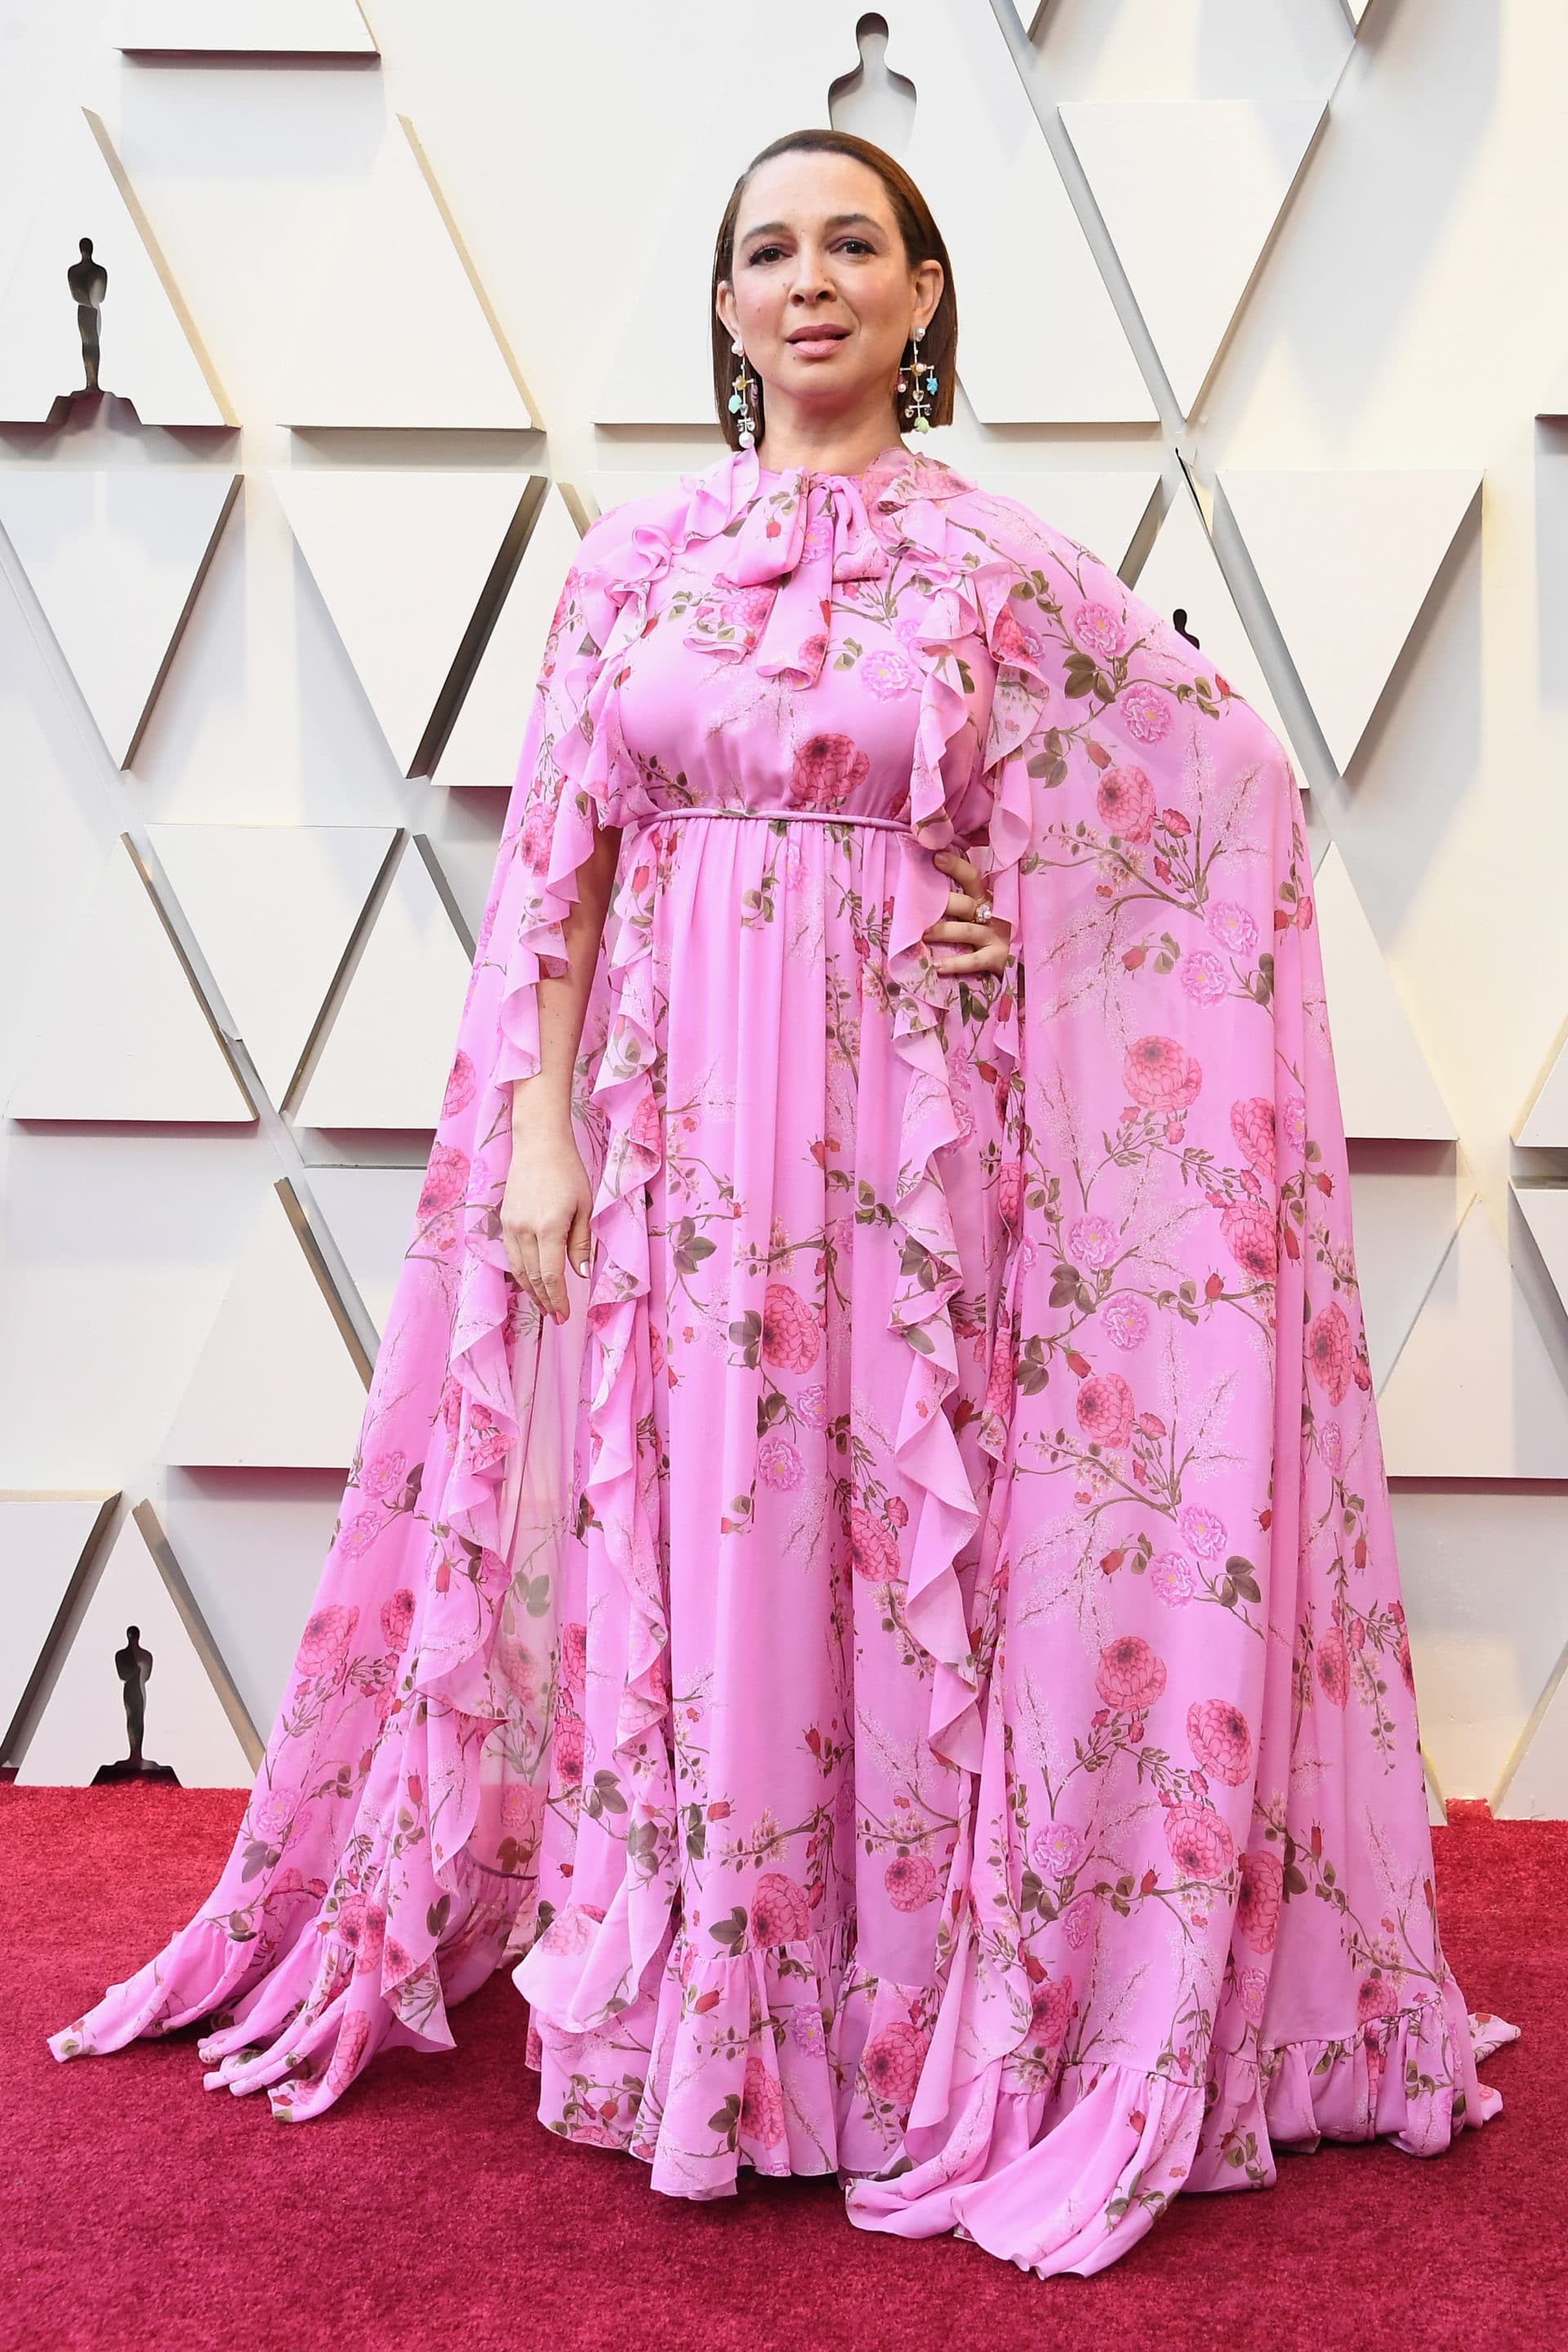 The Oscars Red Carpet Is The Biggest Of The Year & Here Are 2019’s Best Looks